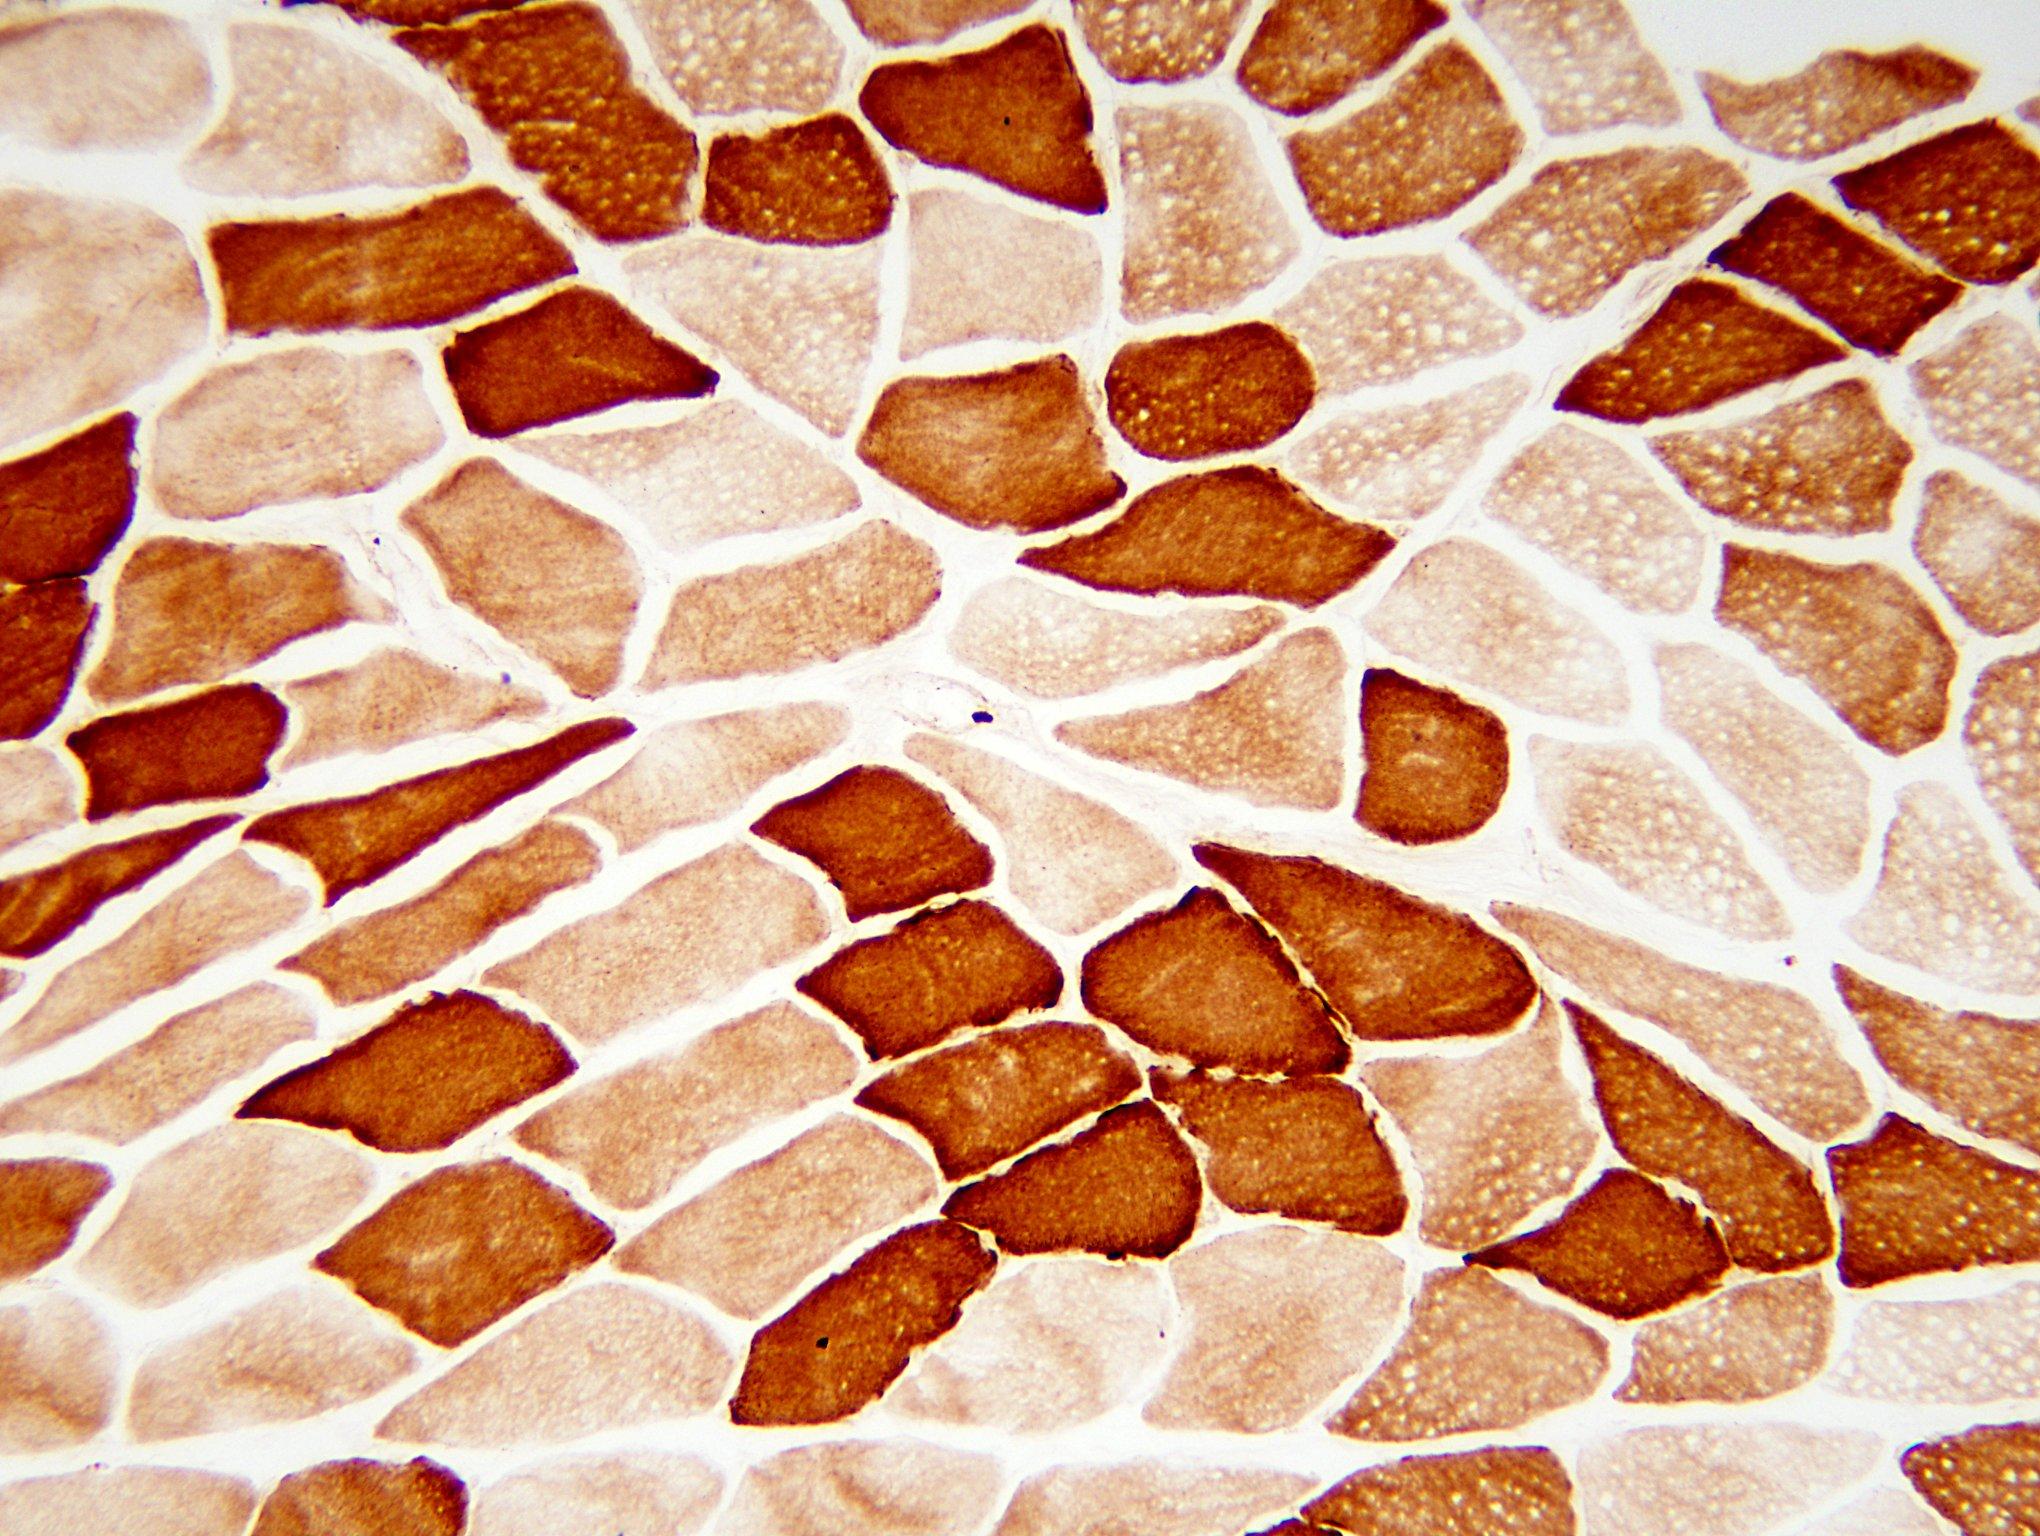 Normal skeletal muscle, cytochrome oxidase stain x 100